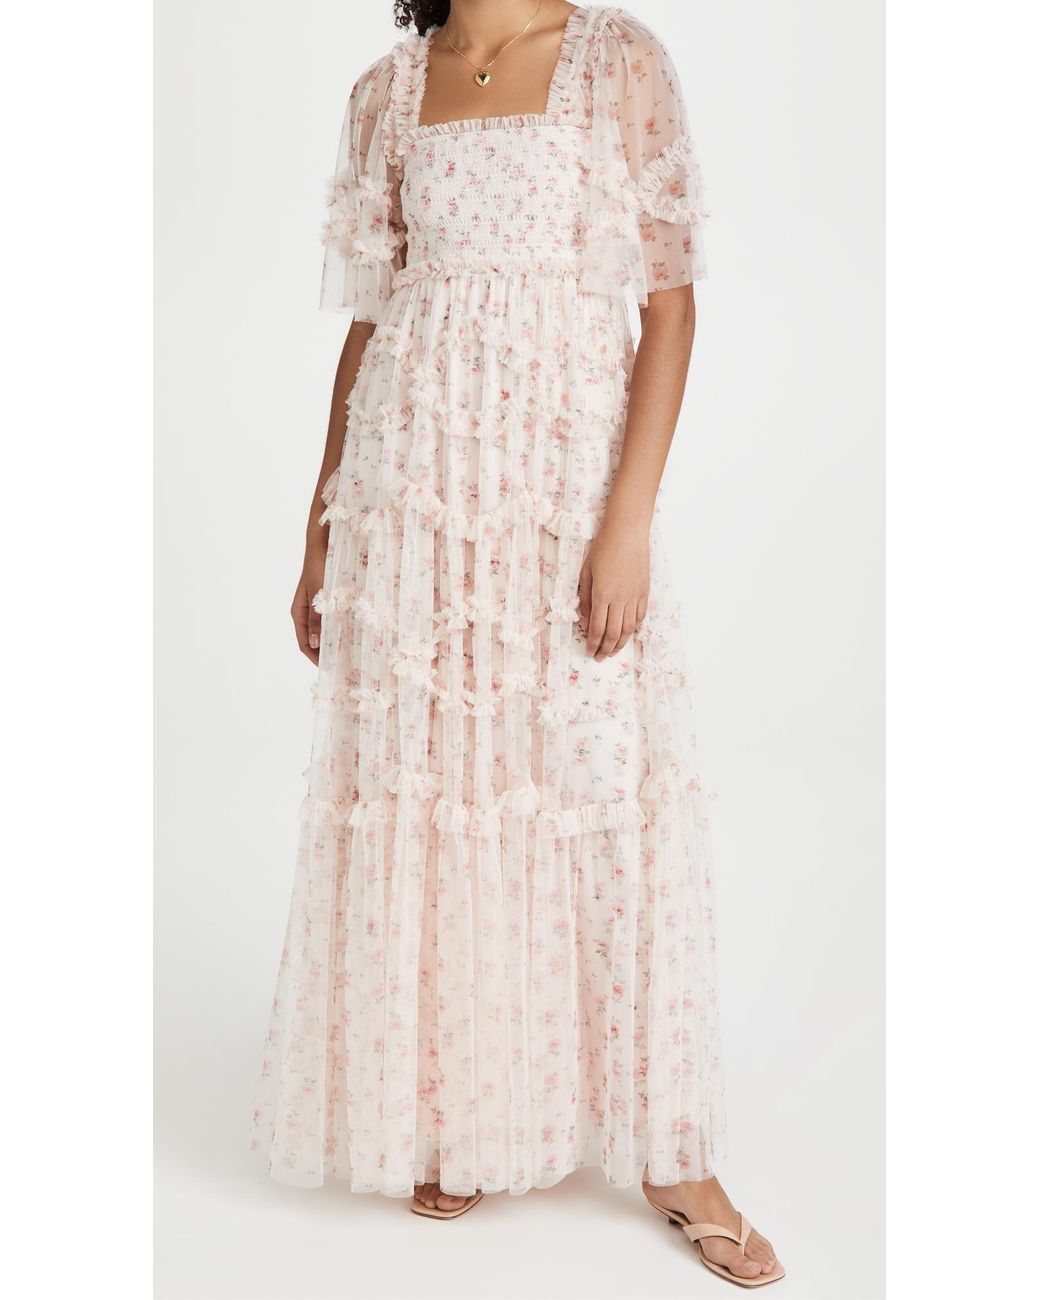 Needle & Thread Bijou Rose Smocked Gown in Pink | Lyst